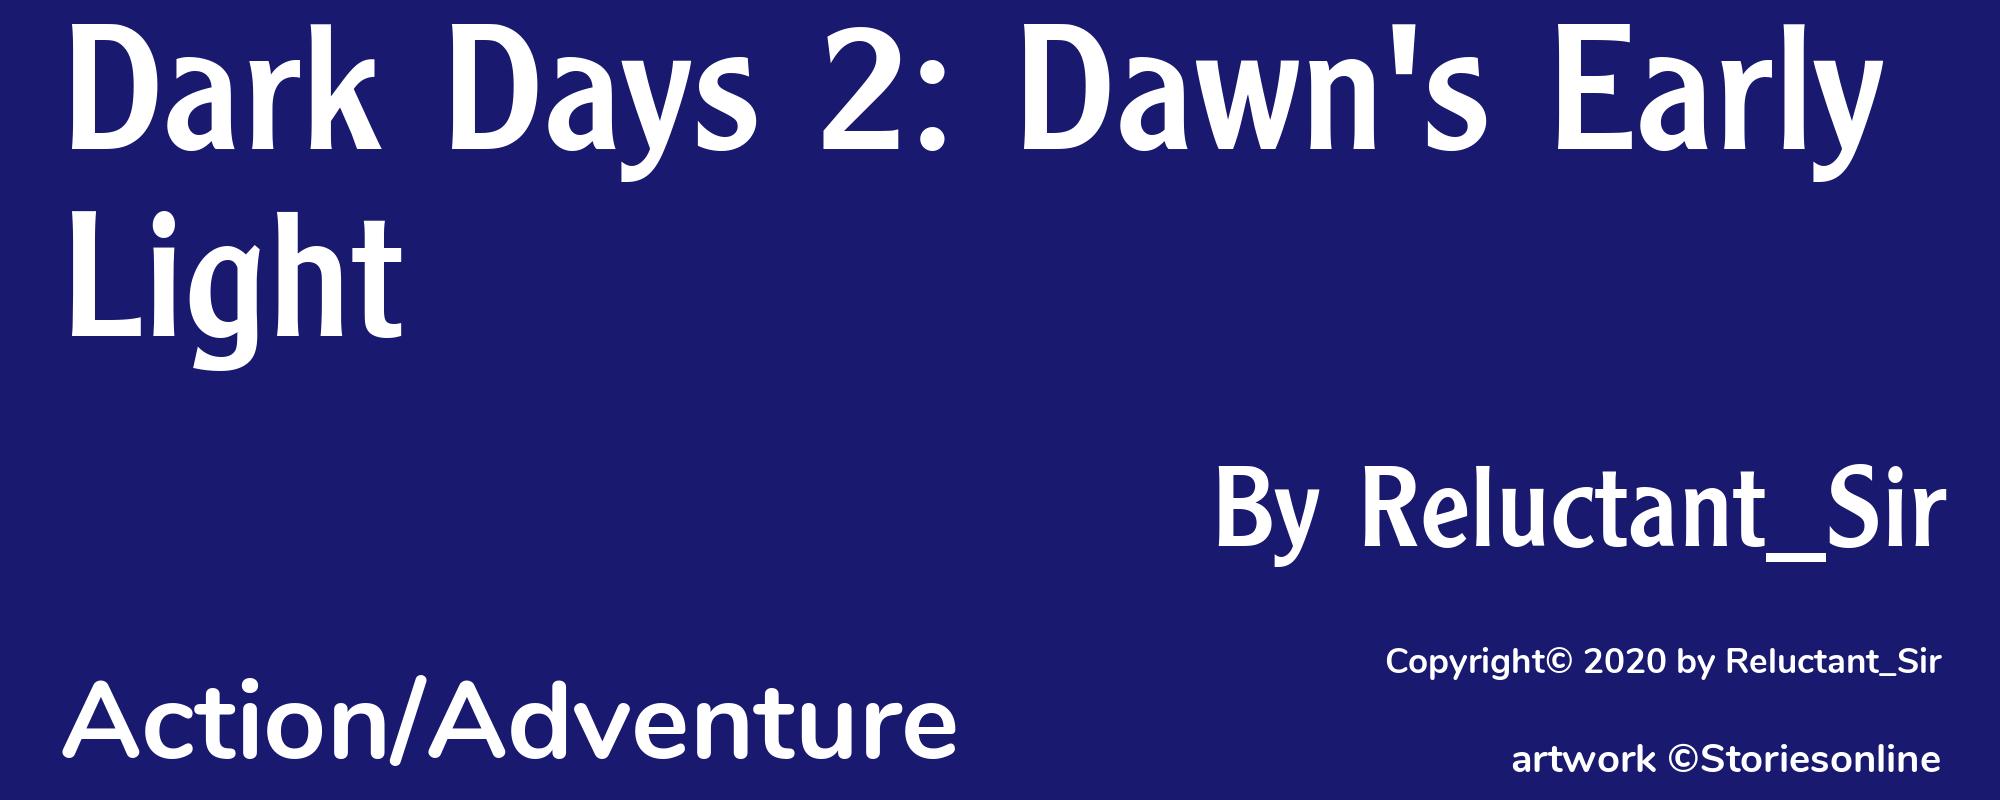 Dark Days 2: Dawn's Early Light - Cover